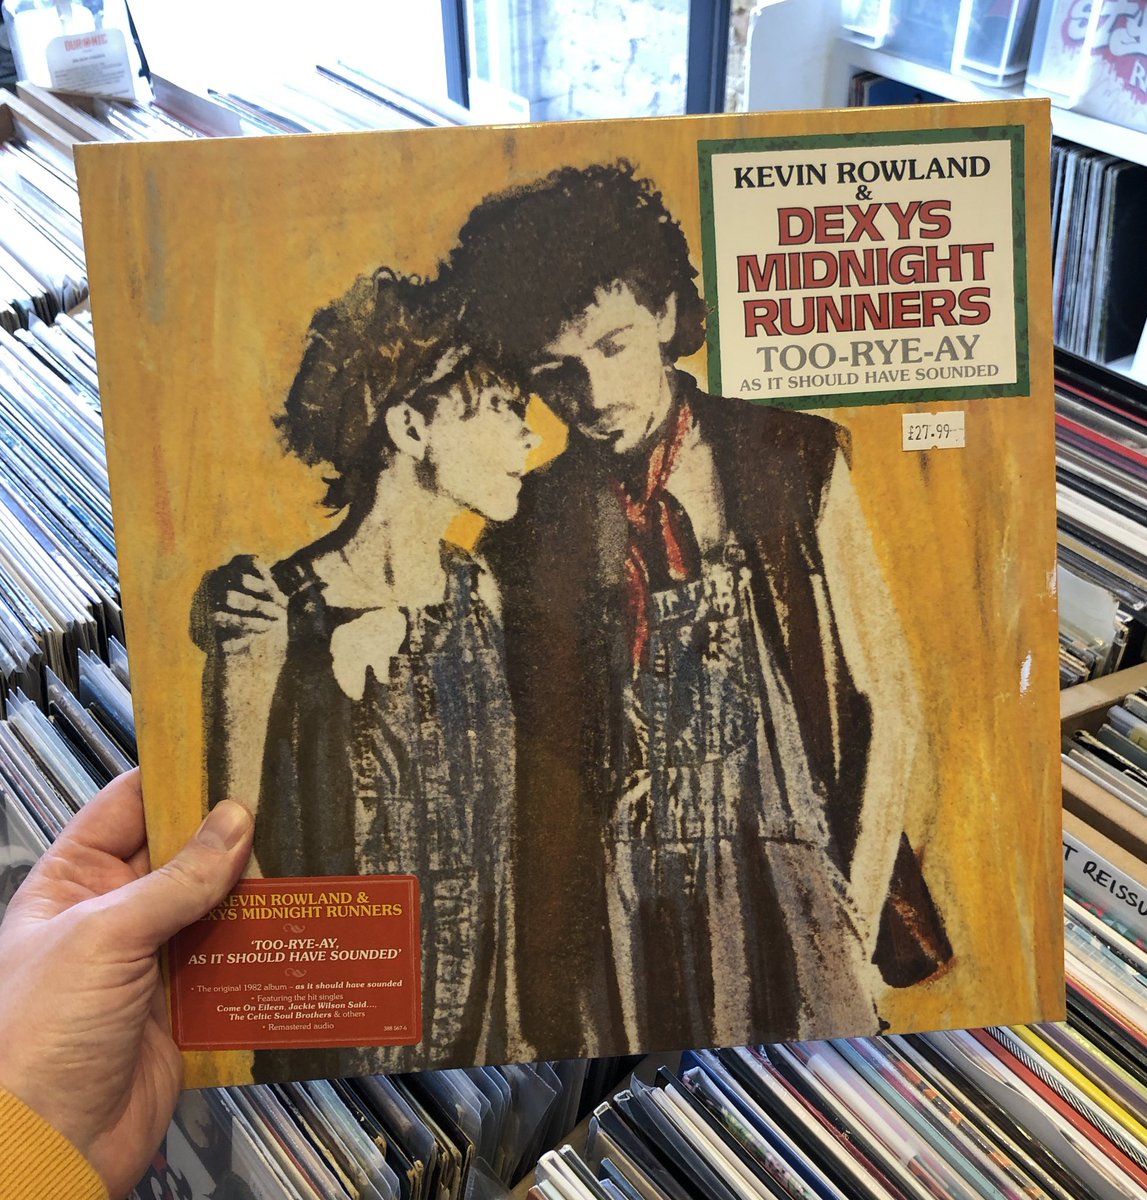 Kevin Rowland & Dexys Midnight Runners - Too-Rye-Aye, as it should’ve sounded. Newly remixed by Kevin, Pete Schwier and @oharaviolin and out this week 🛒 southrecordshop.com/products/kevin…